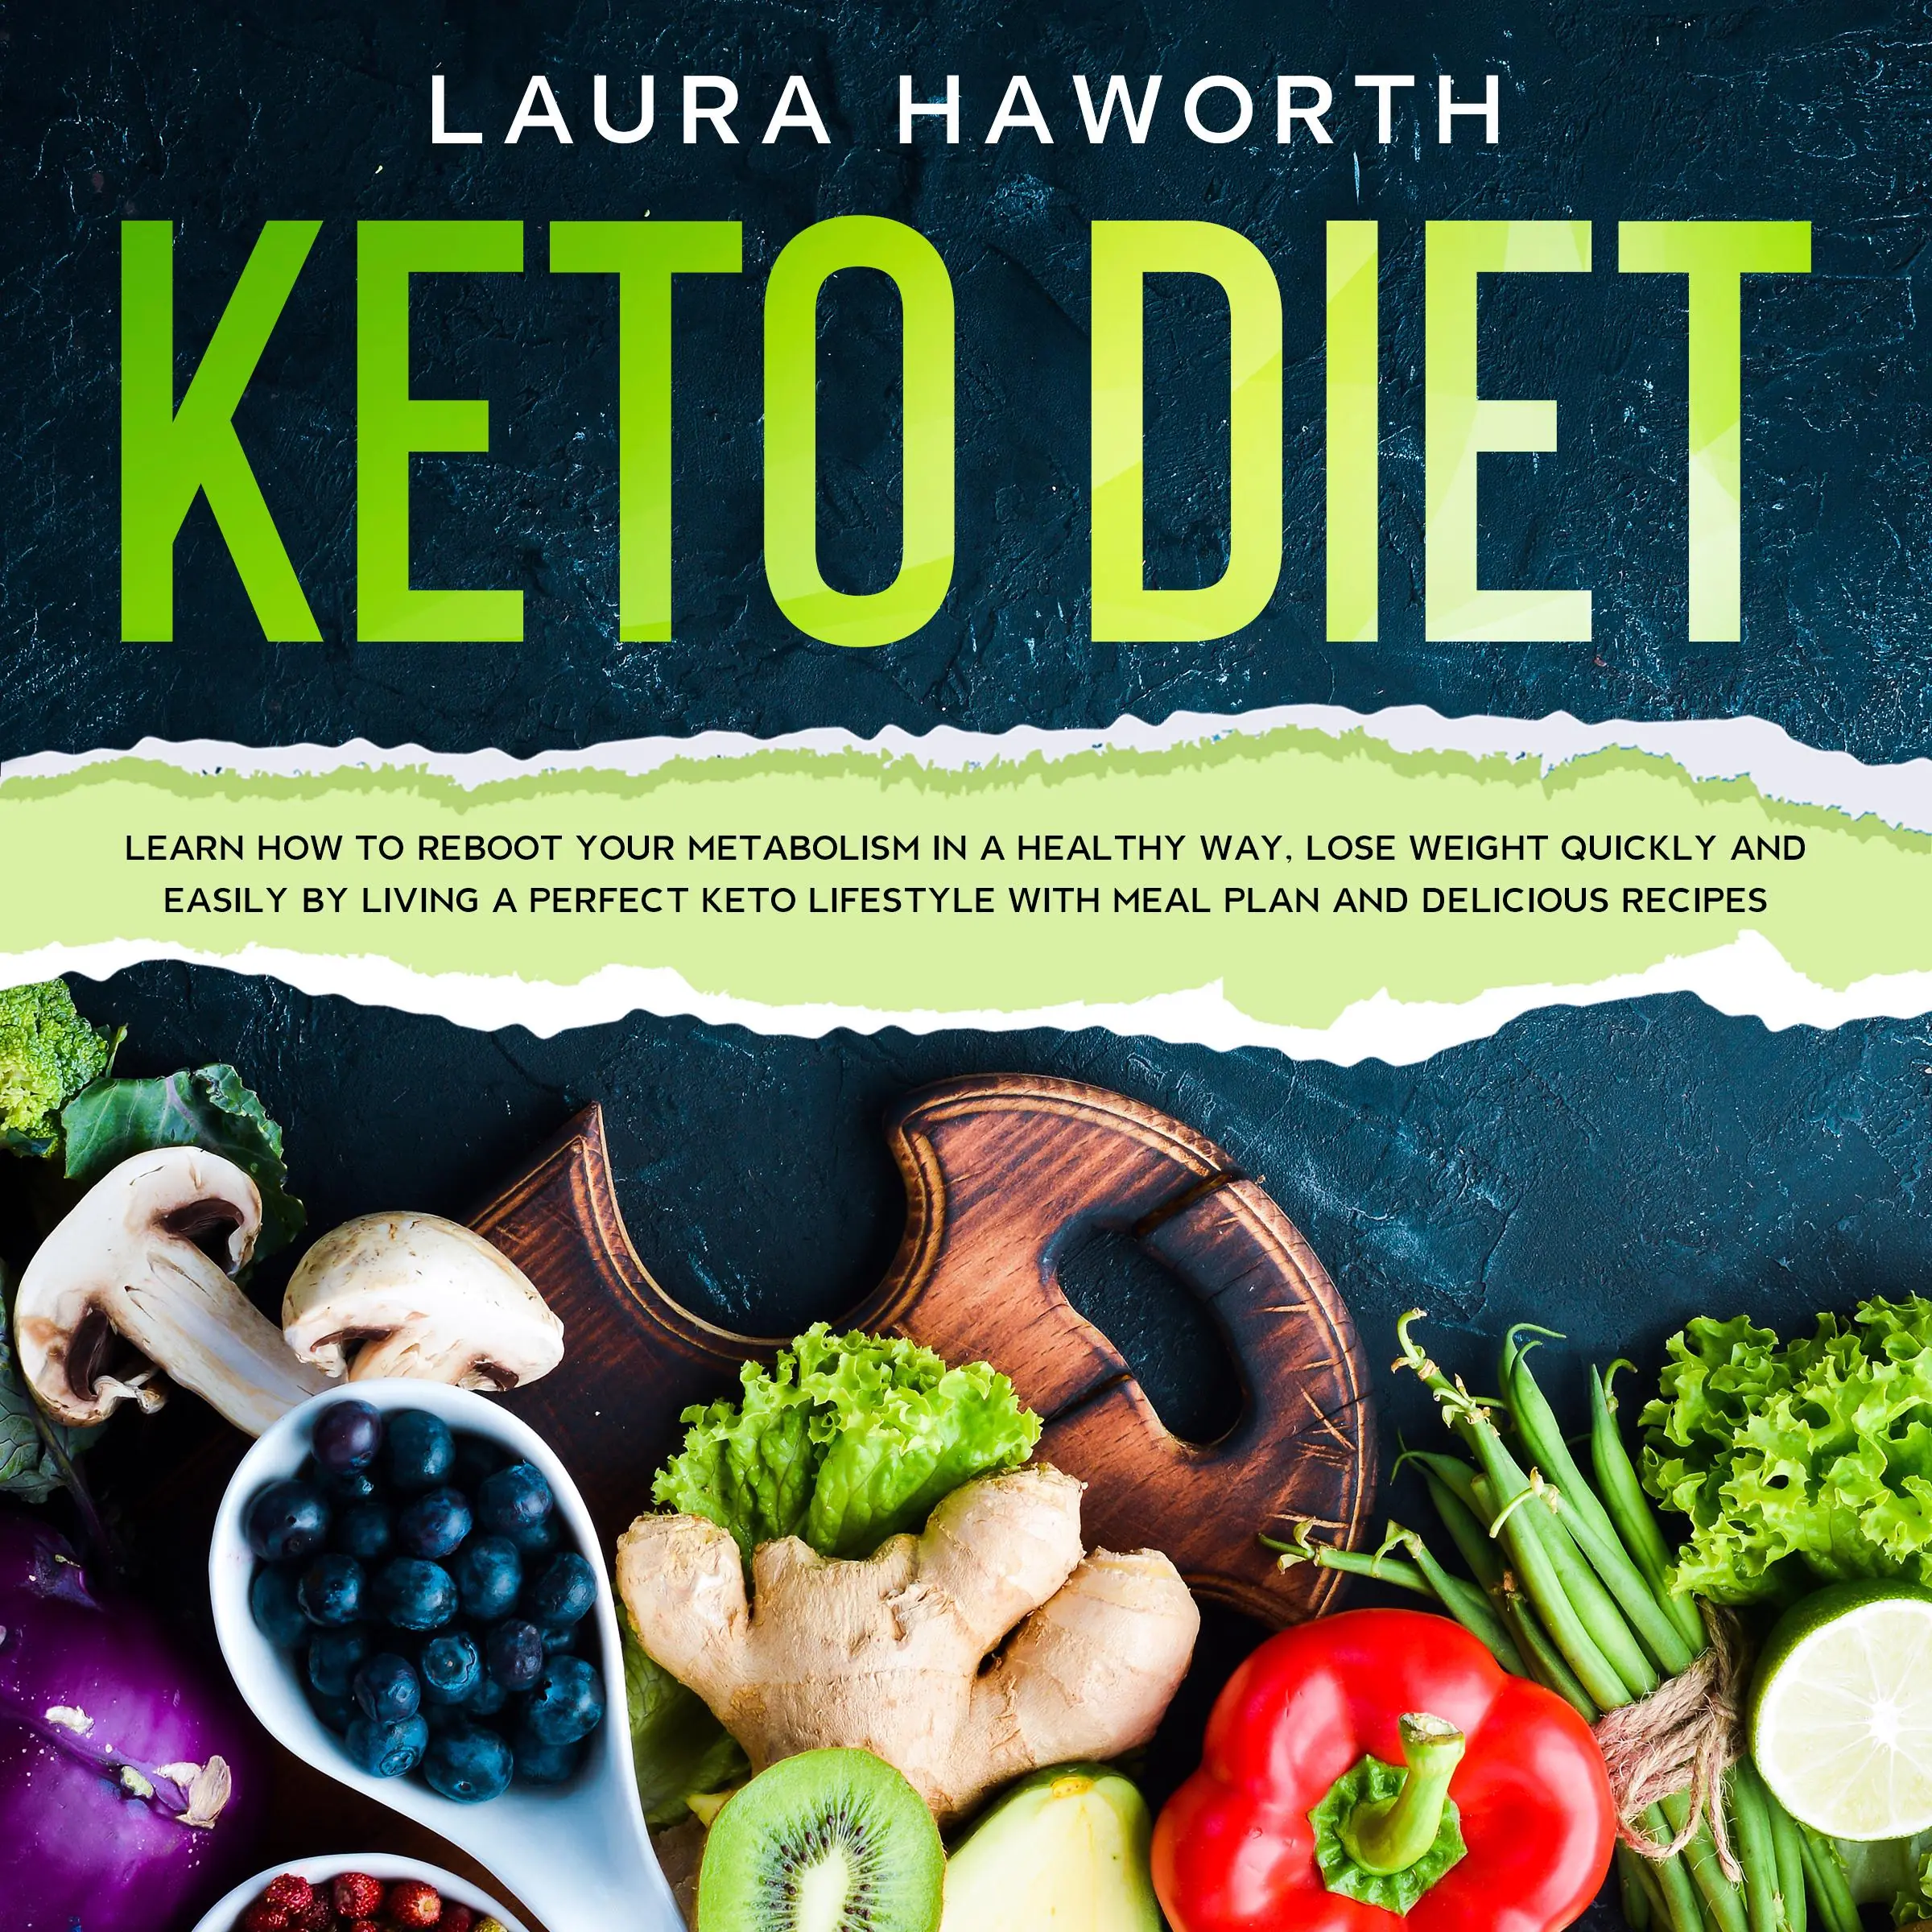 KETO DIET: Learn How to Reboot Your Metabolism in a Healthy Way, Lose Weight Quickly and Easily by Living a Perfect Keto Lifestyle  with Meal Plan and Delicious Recipes Audiobook by Laura Haworth